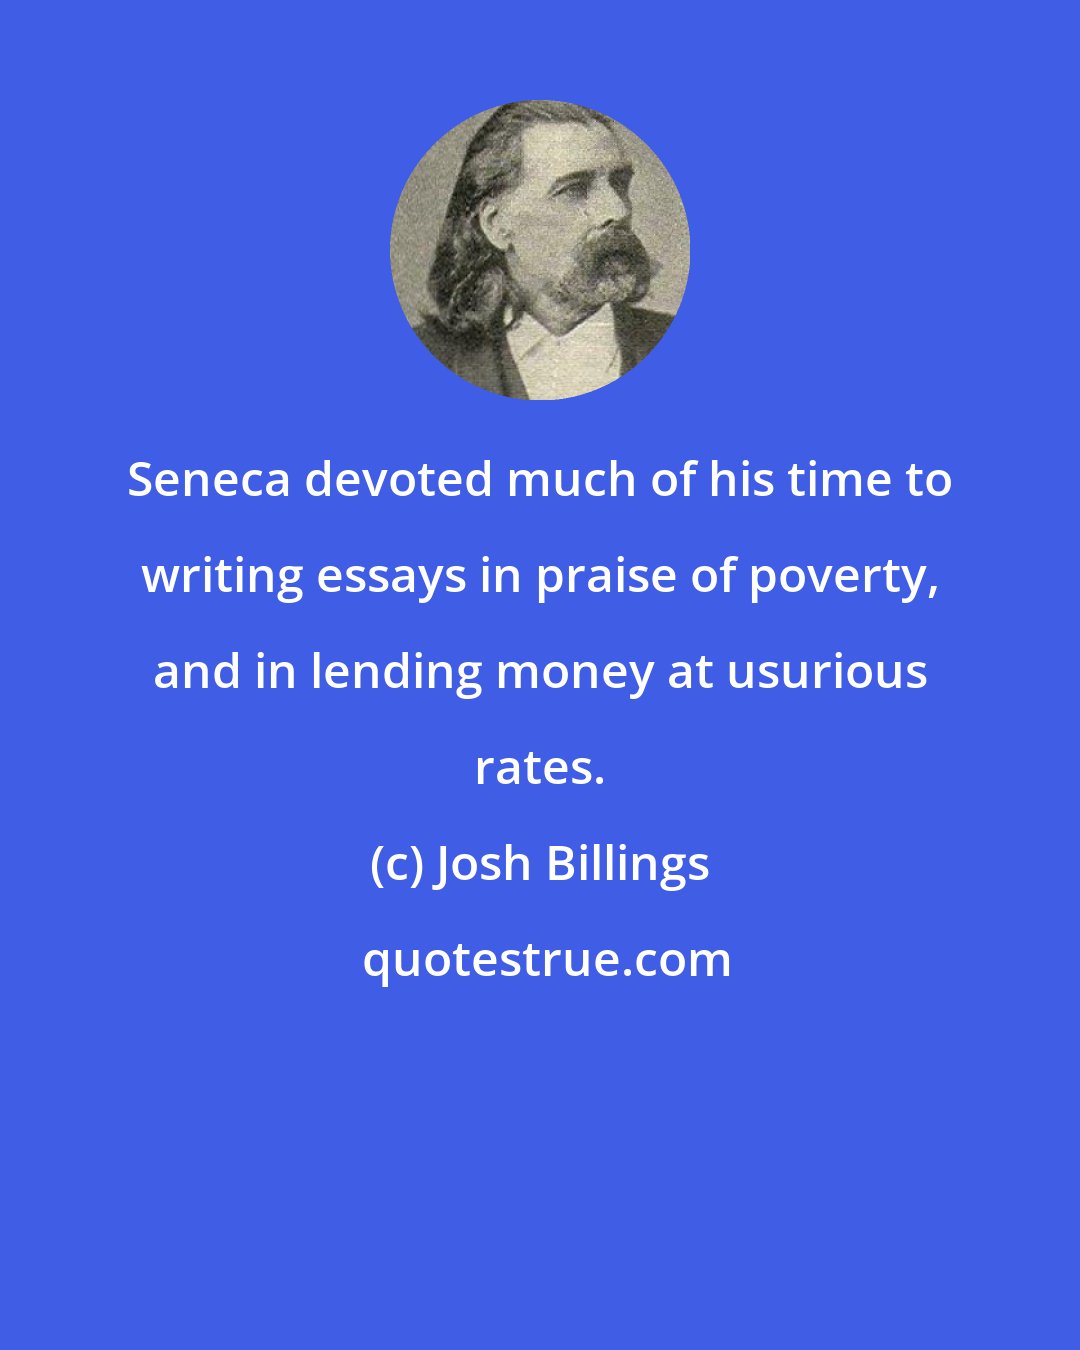 Josh Billings: Seneca devoted much of his time to writing essays in praise of poverty, and in lending money at usurious rates.